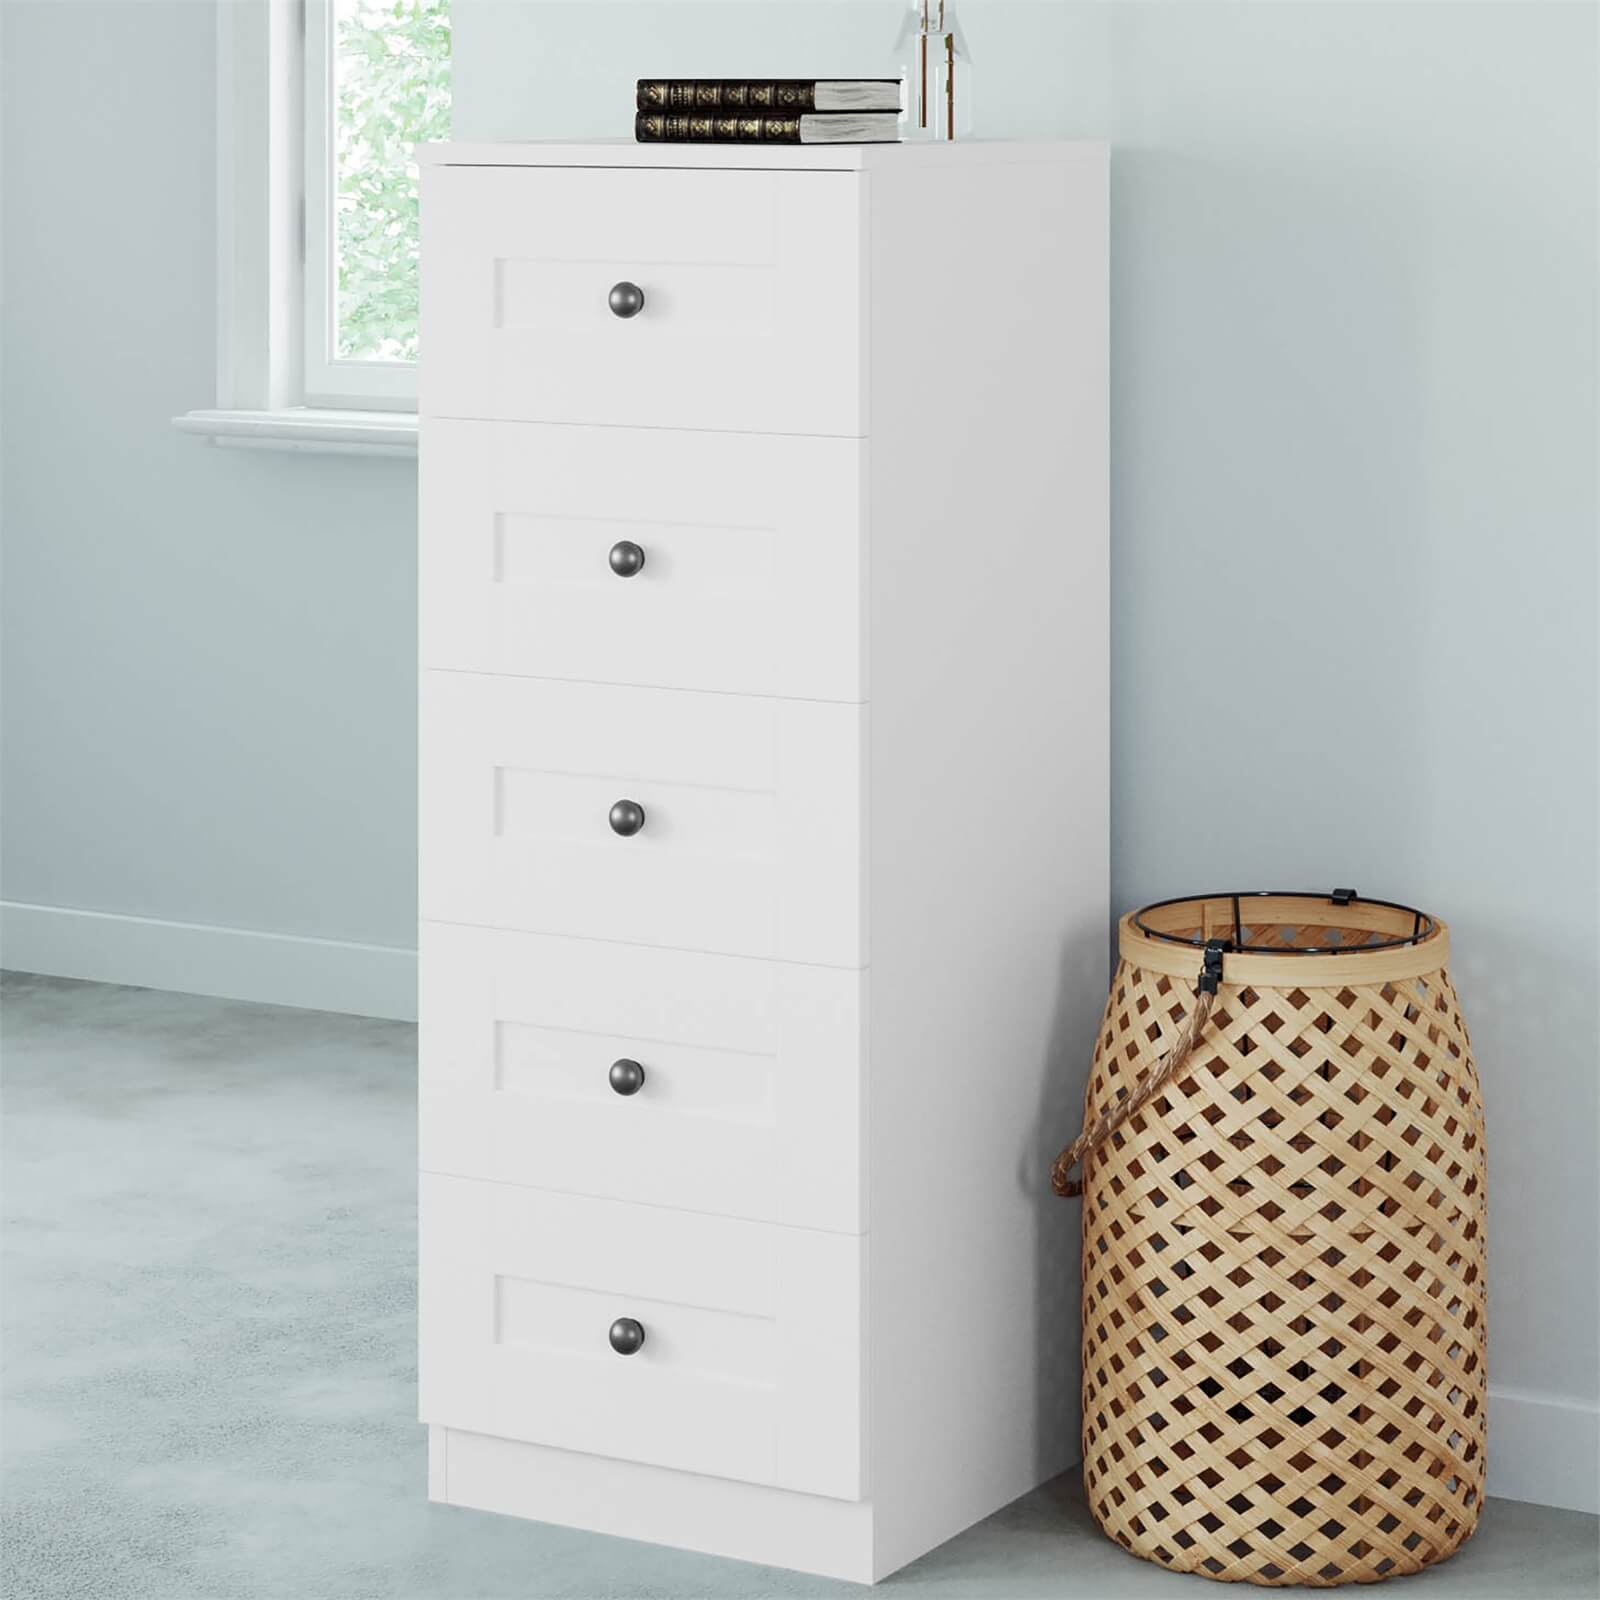 Fitted Bedroom Shaker 5 Drawer Chest - White